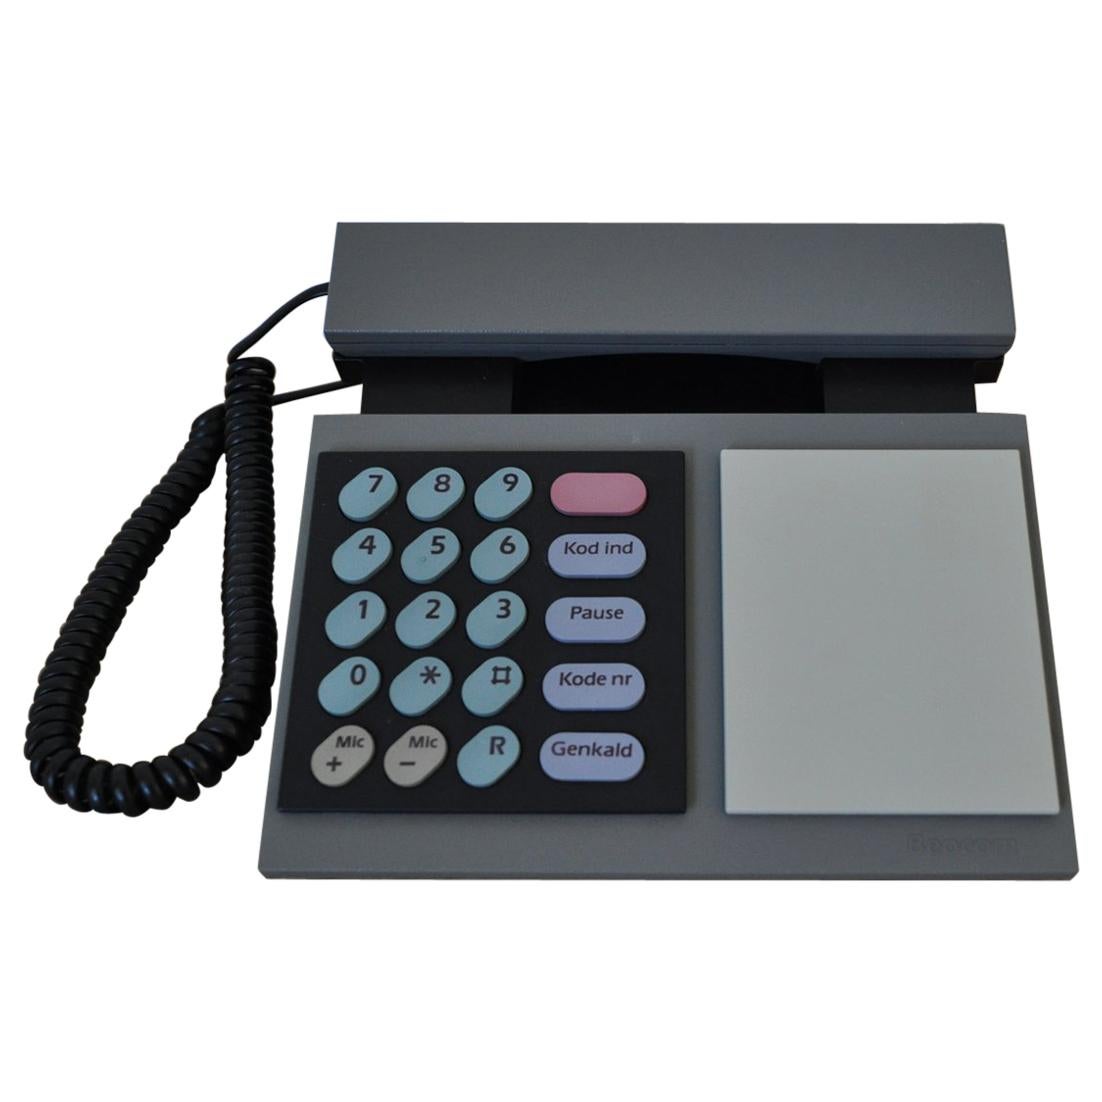 Iconic Beocom 1000 Telephone from 1986 by Bang & Olusfen For Sale